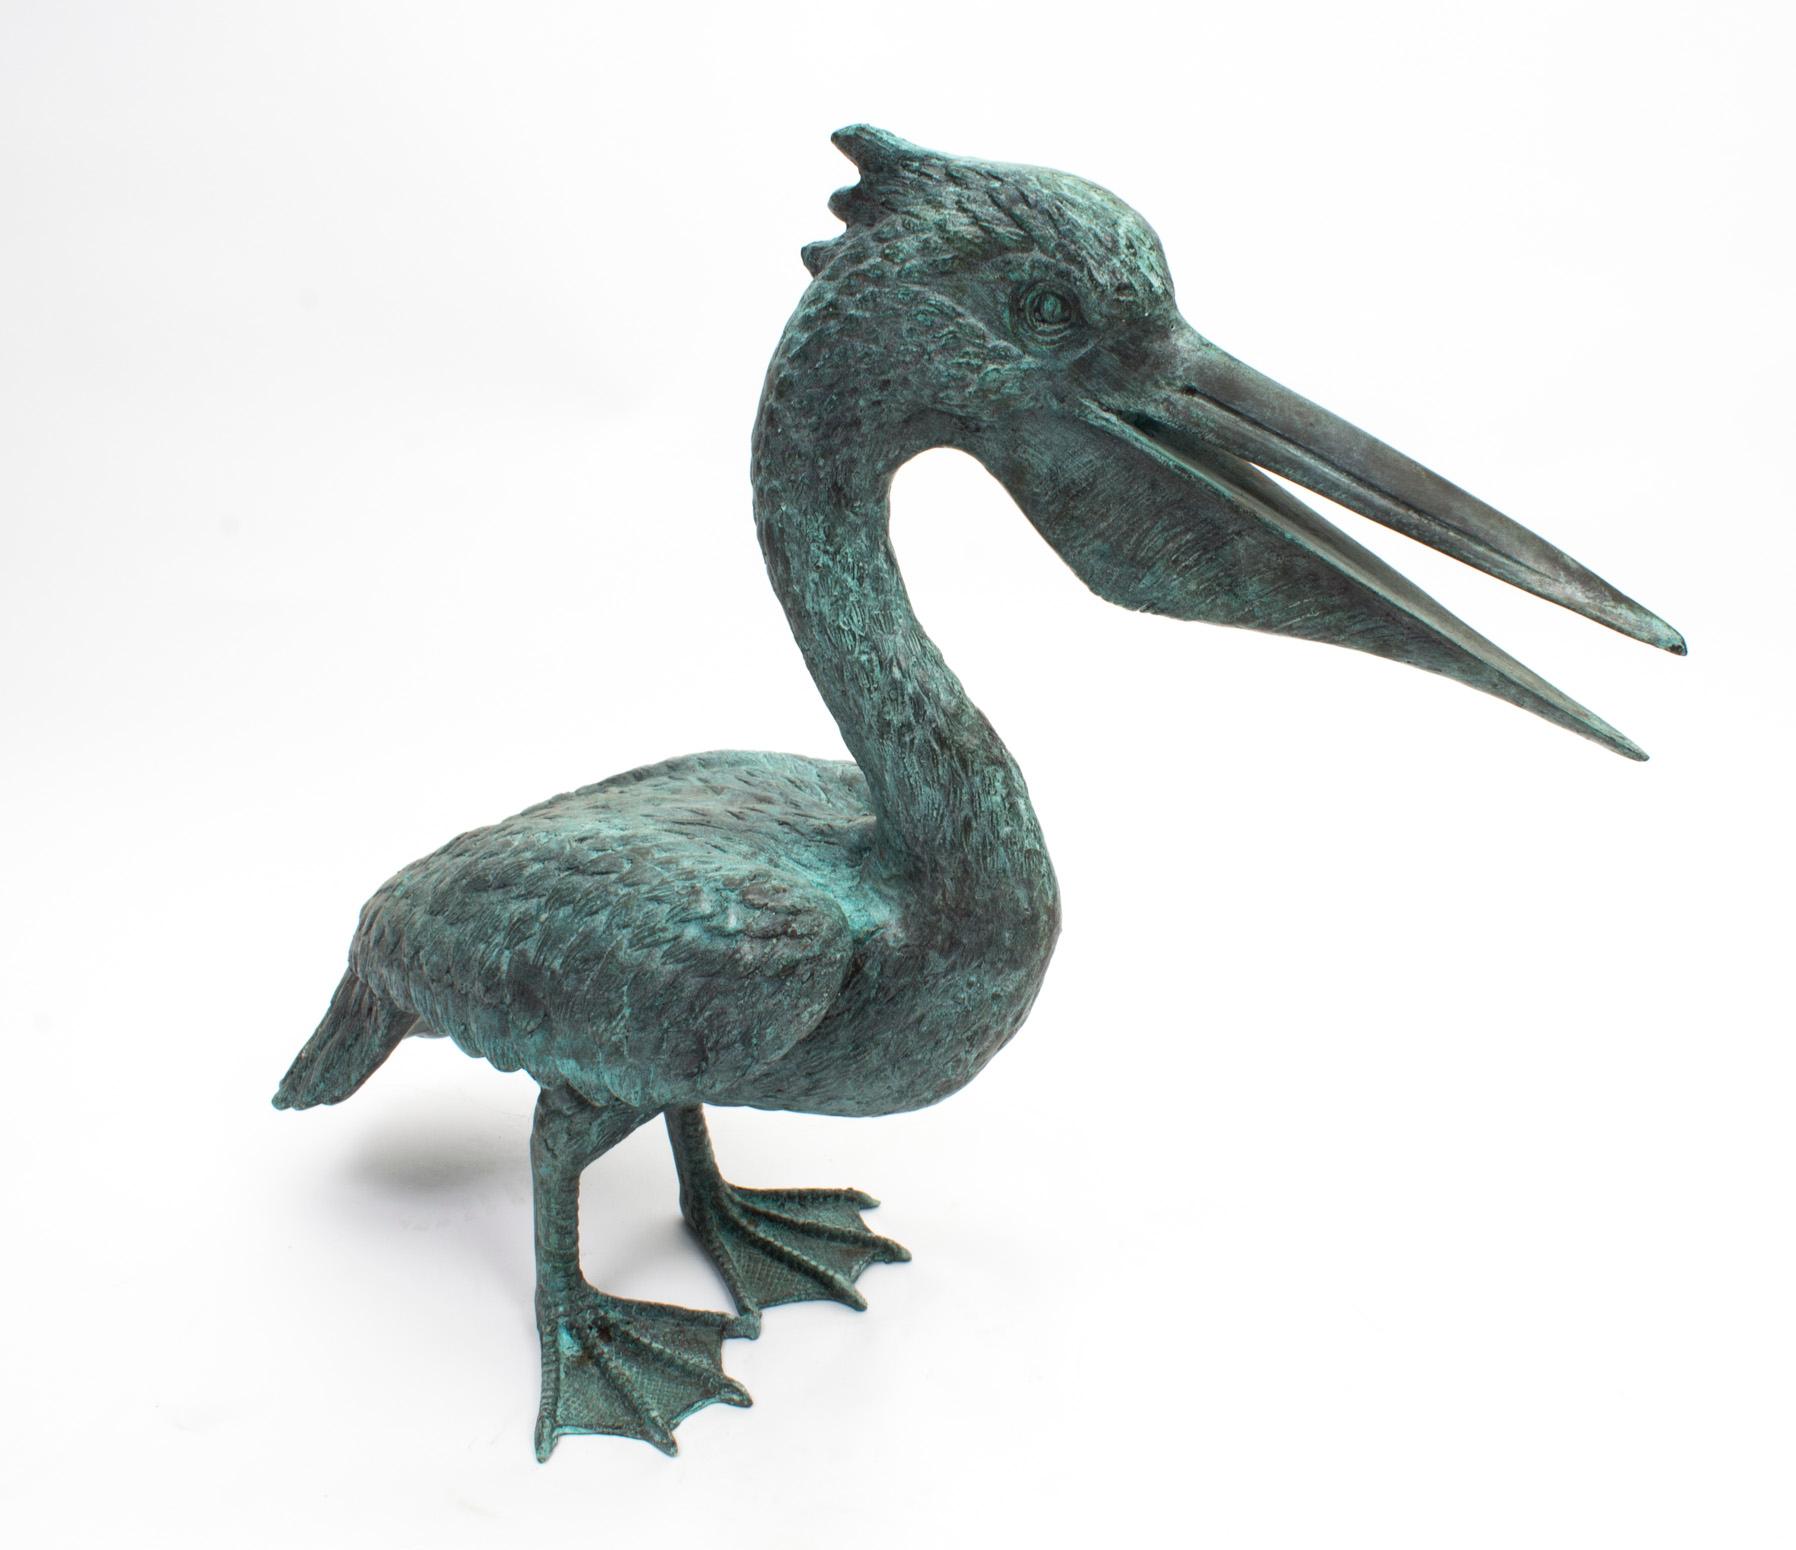 This is a lovely Vintage pair of bronze pelicans with fabulous Verdigris patina, dating from the last quarter of the 20th century.

The attention to detail is absolutely fantastic - the elongated beaks, plumage, and webbed feet all appear